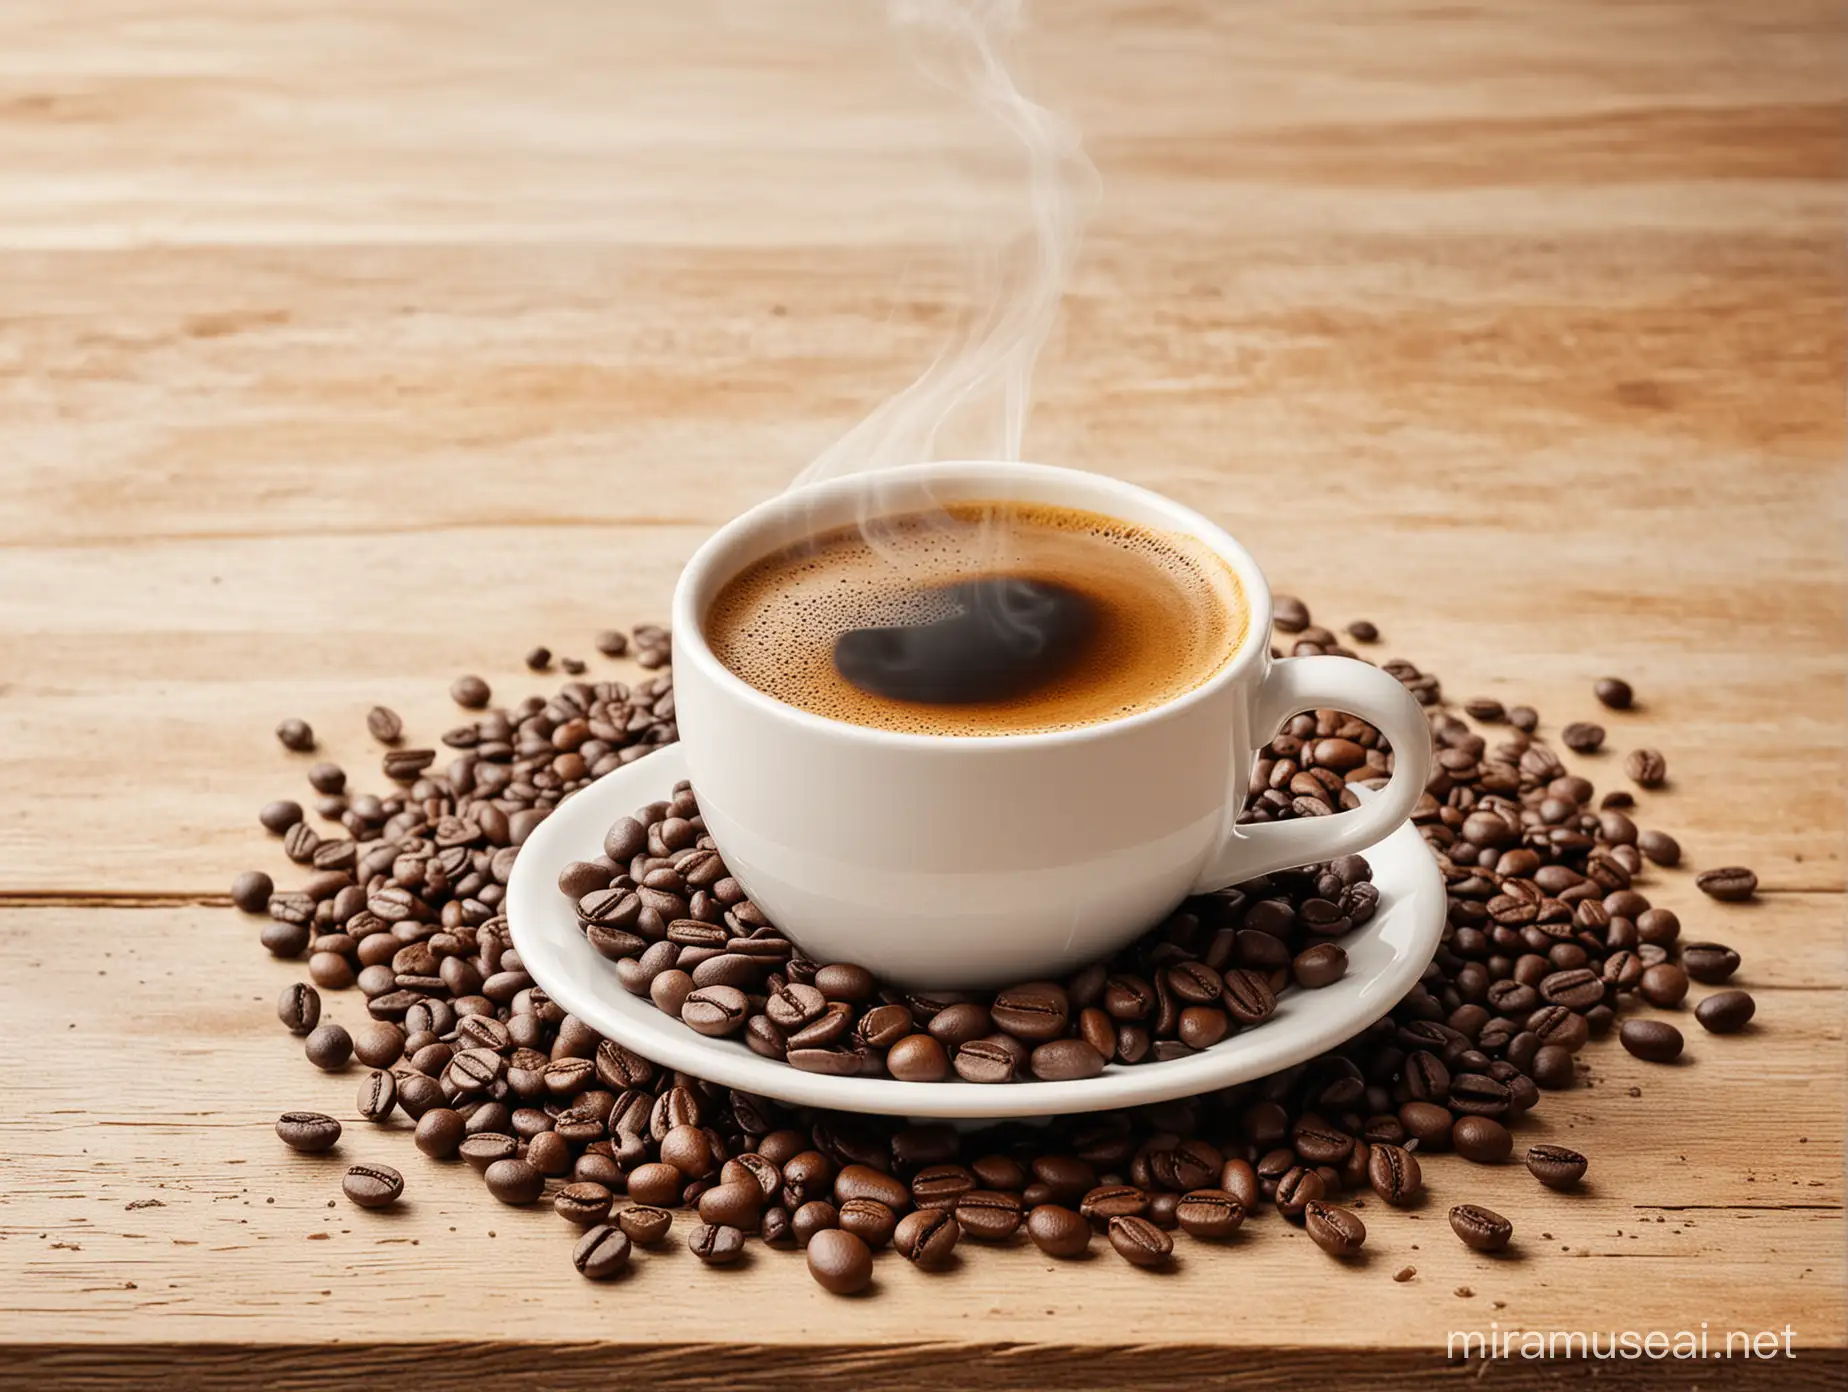 Steaming Cup of Coffee on Rustic Wooden Table with Freshly Roasted Beans